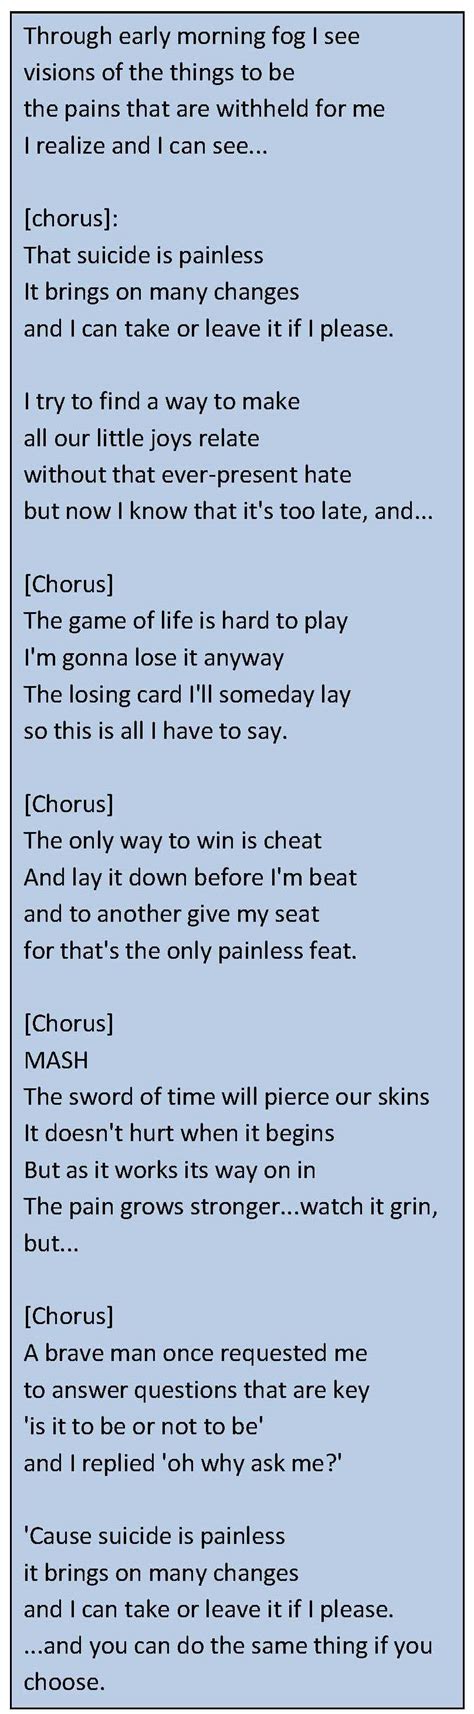 Free printable and easy chords for song by Johnny Mandel - Theme From Mash Suicide Is Painless. Chords ratings, diagrams and lyrics. Am D7 Through early morning fog I see G Em visions of the things to 